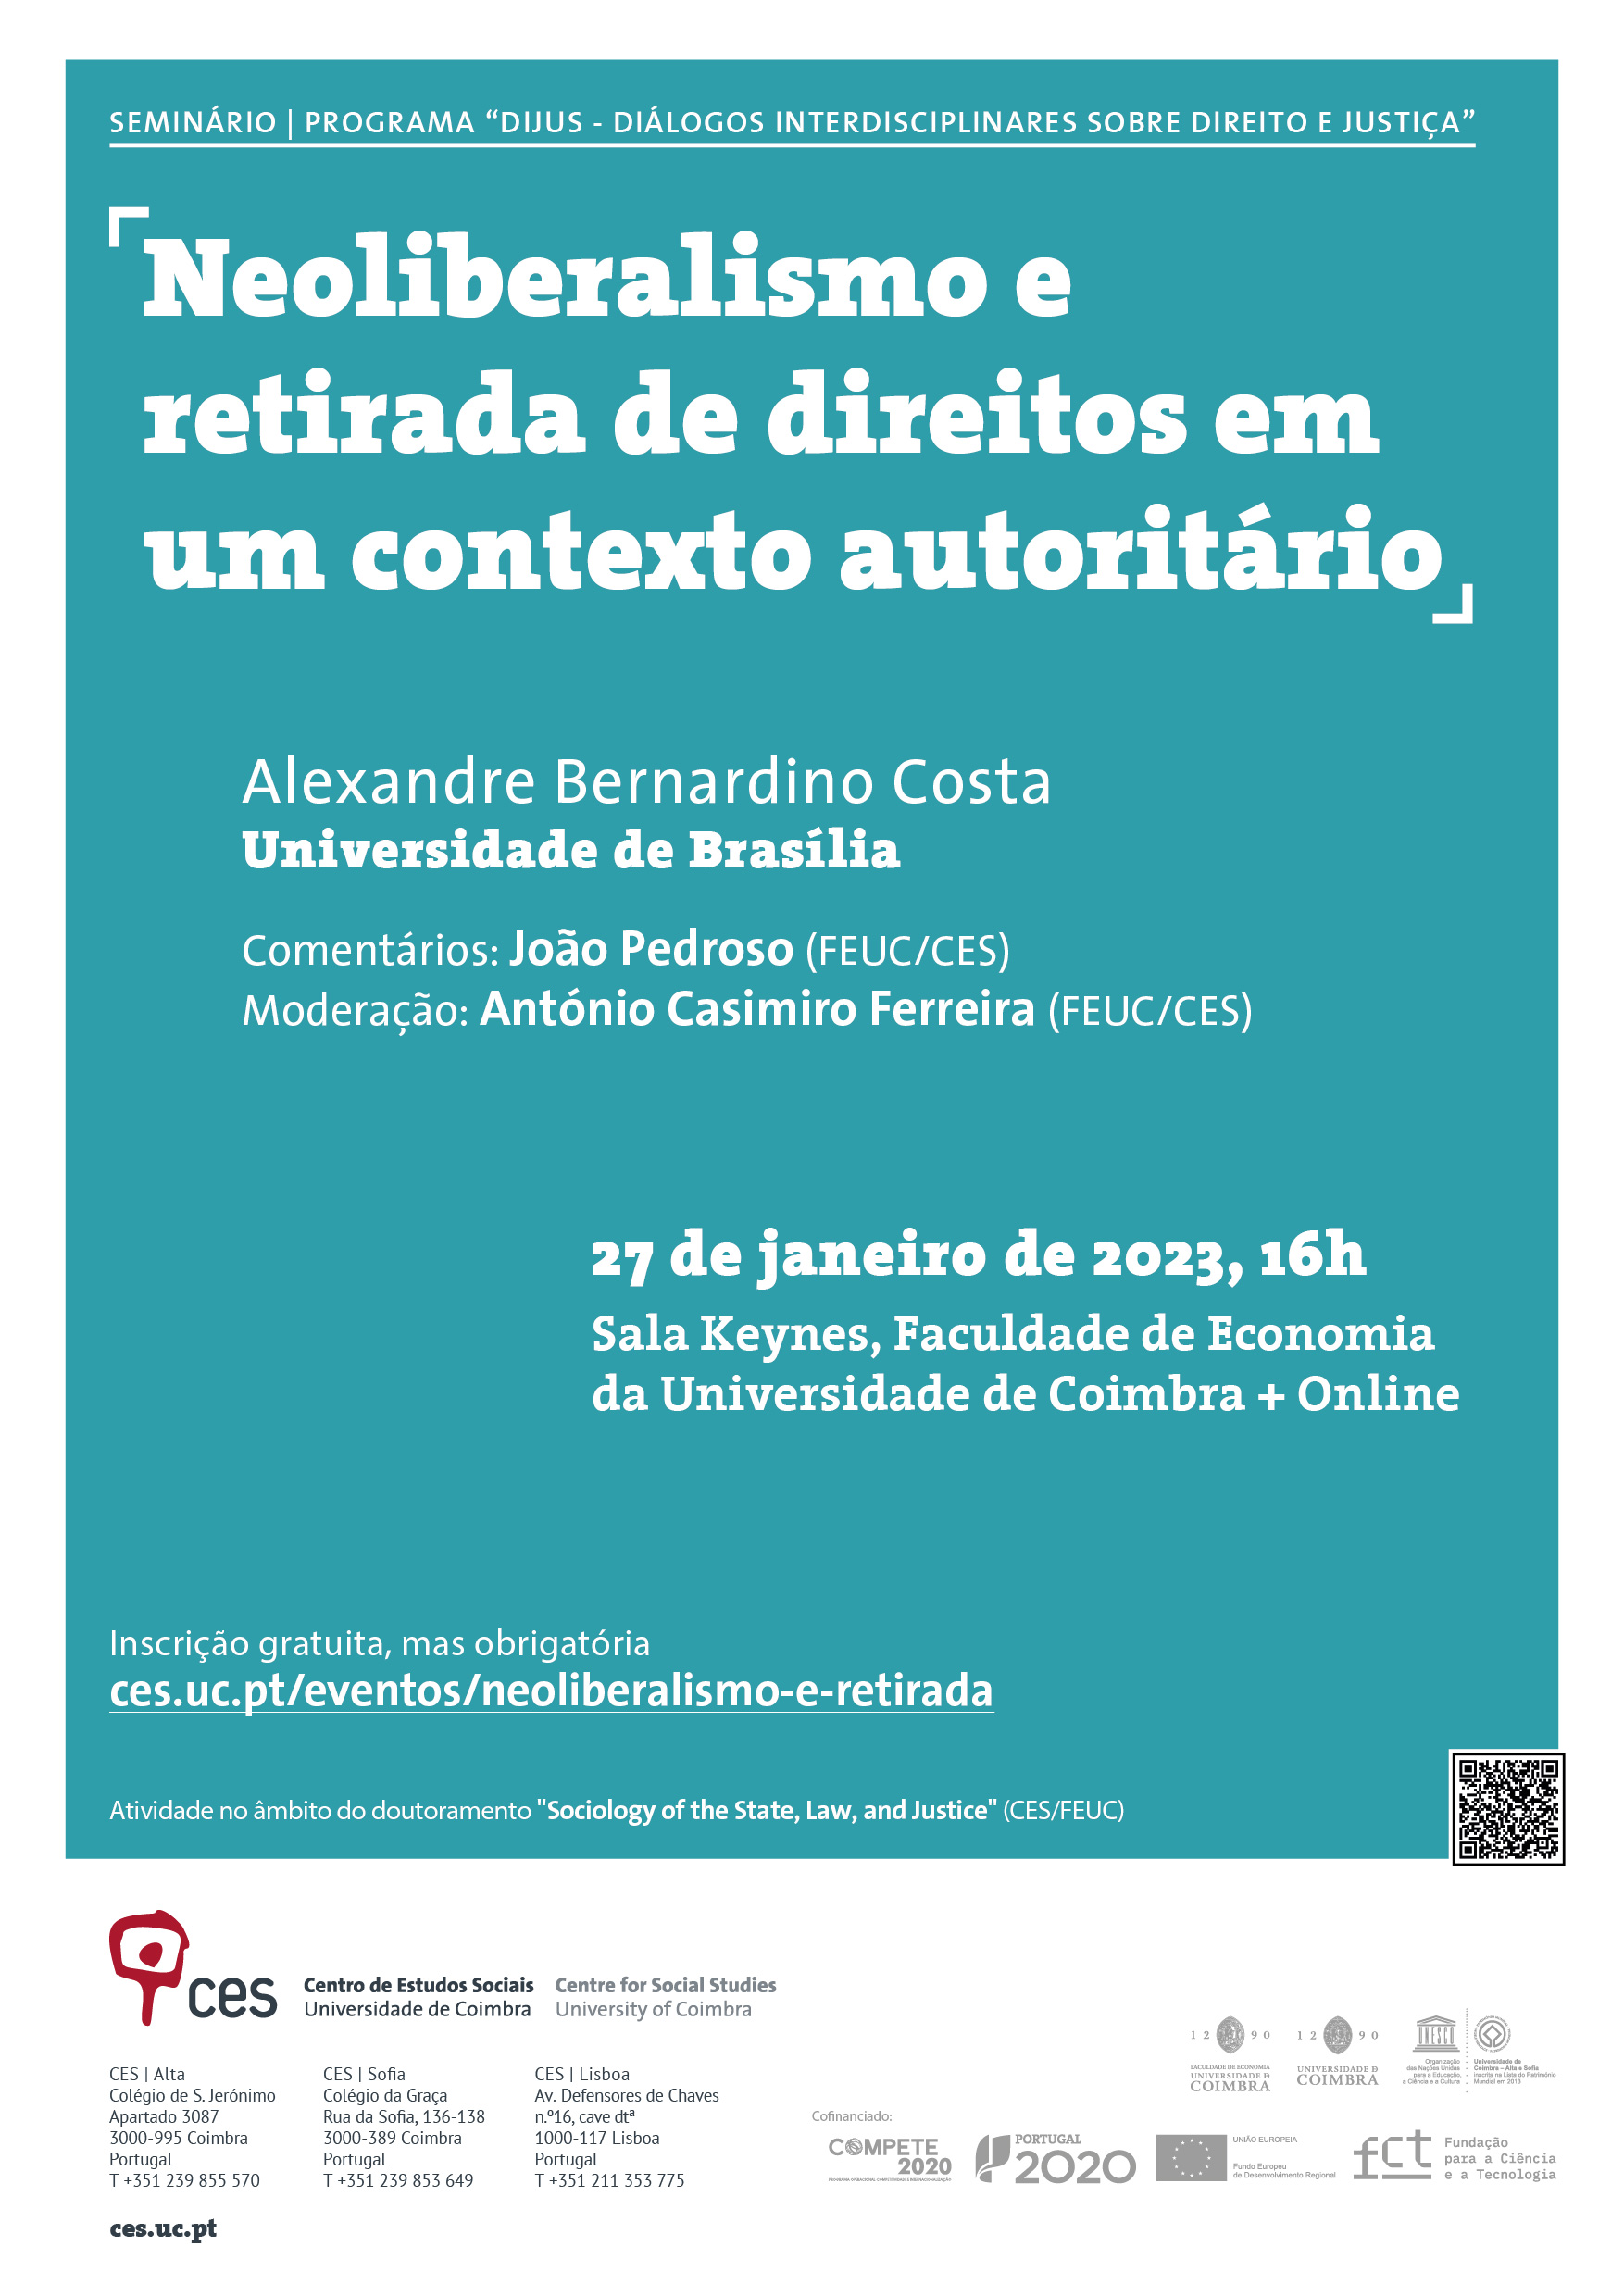 Neoliberalism and the removal of rights in an authoritarian context <span id="edit_41823"><script>$(function() { $('#edit_41823').load( "/myces/user/editobj.php?tipo=evento&id=41823" ); });</script></span>